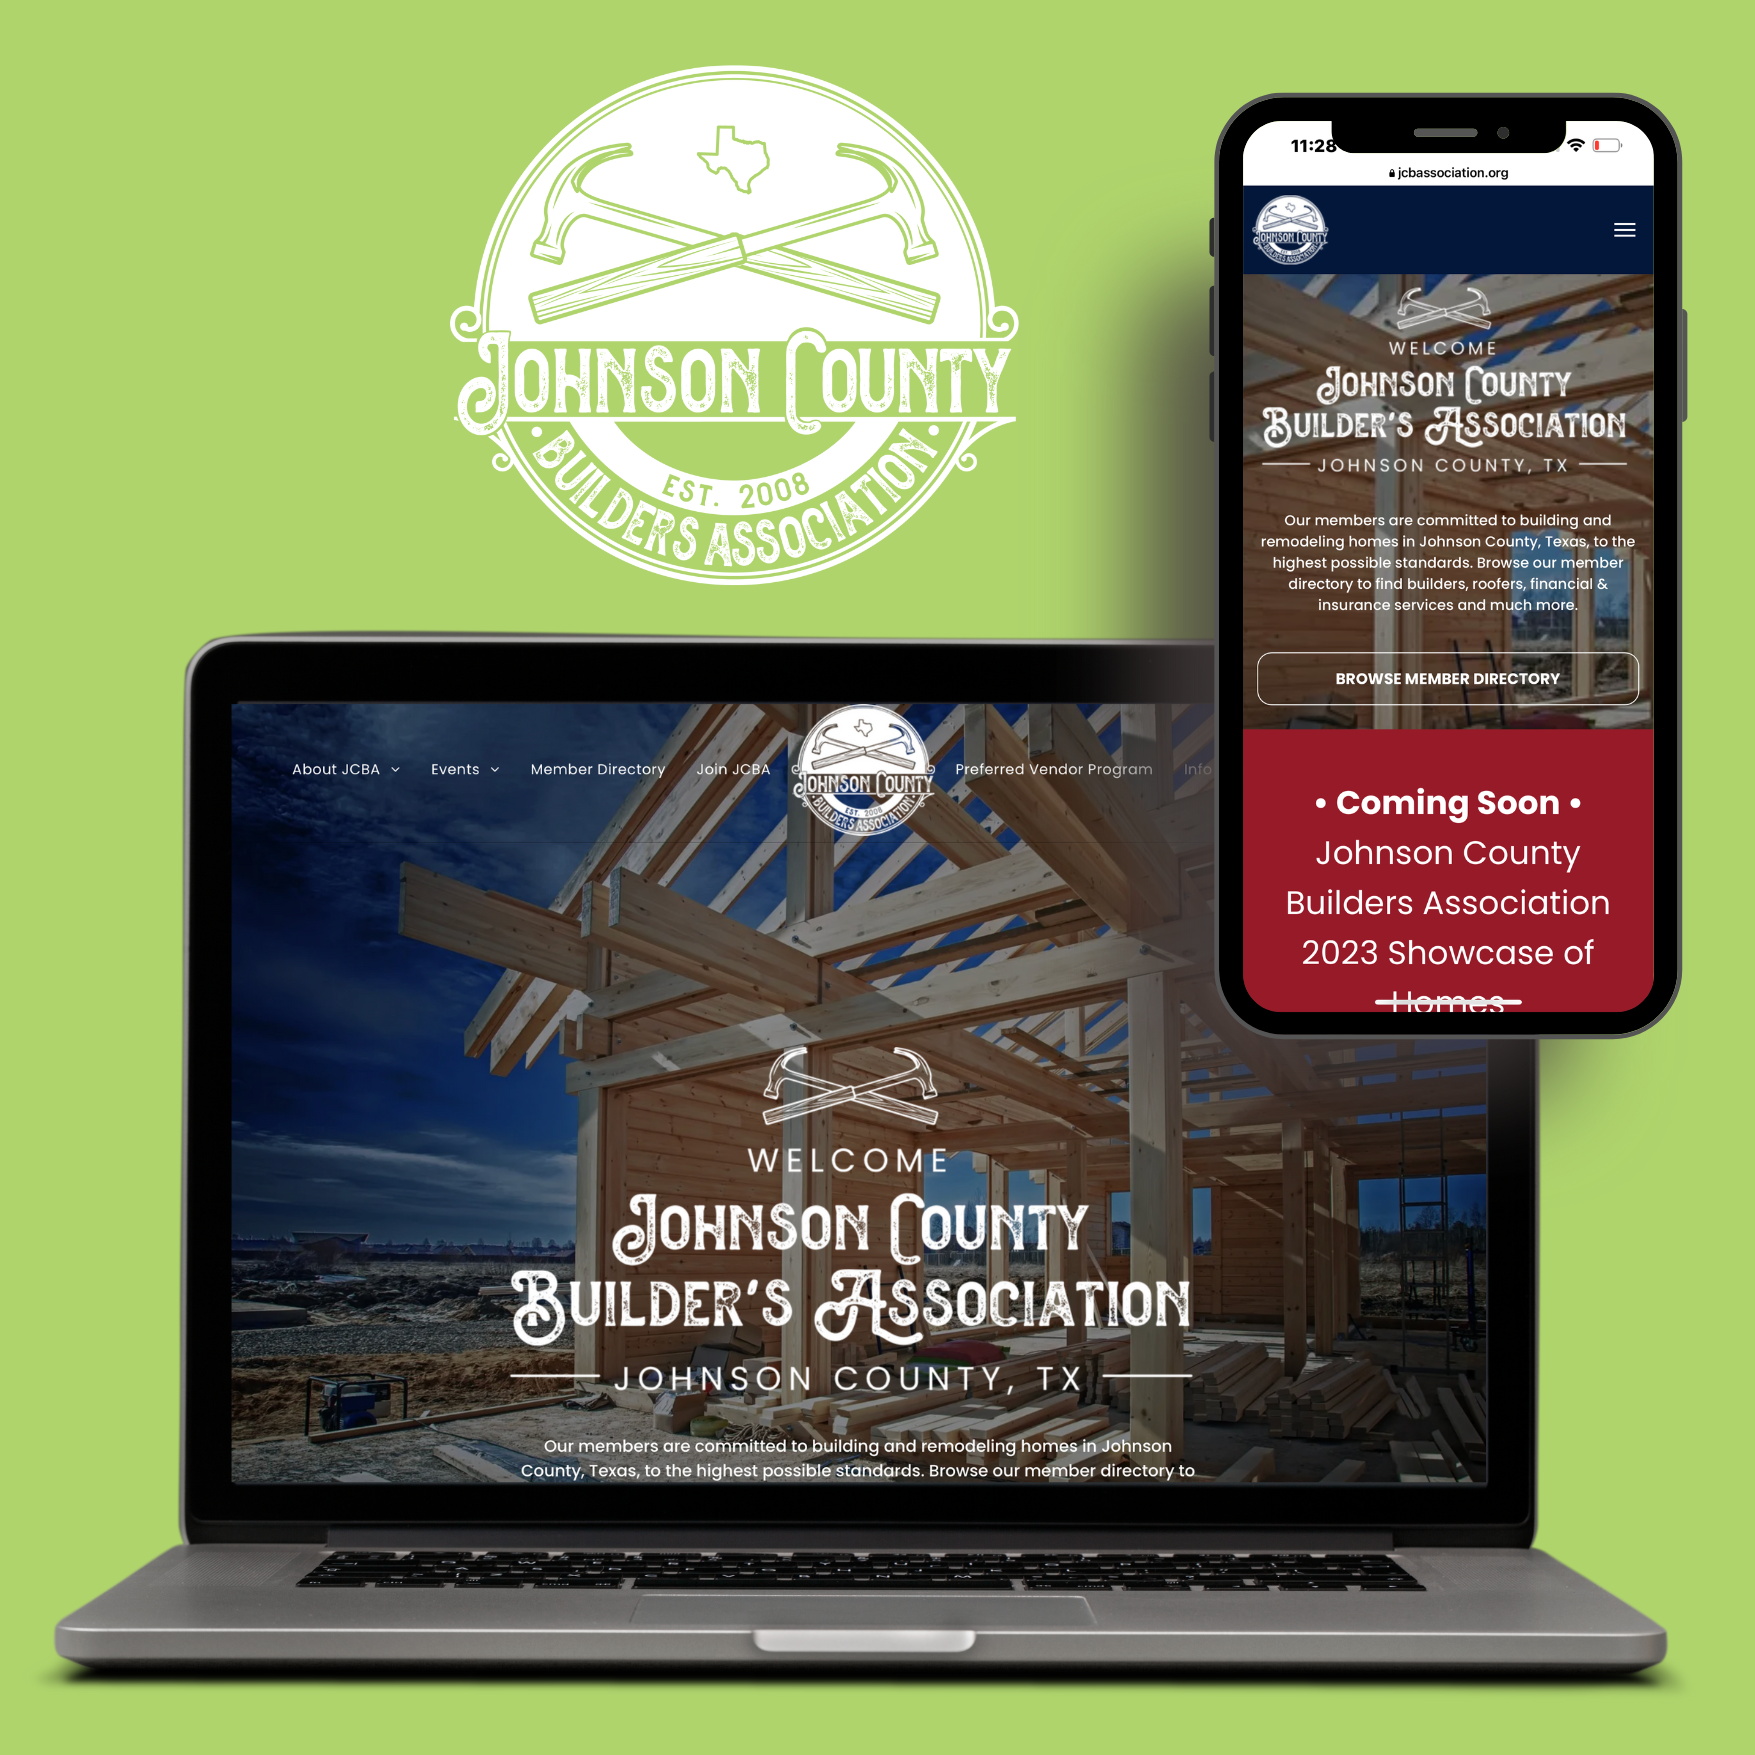 A johnson county builder 's association website is displayed on a laptop and phone.